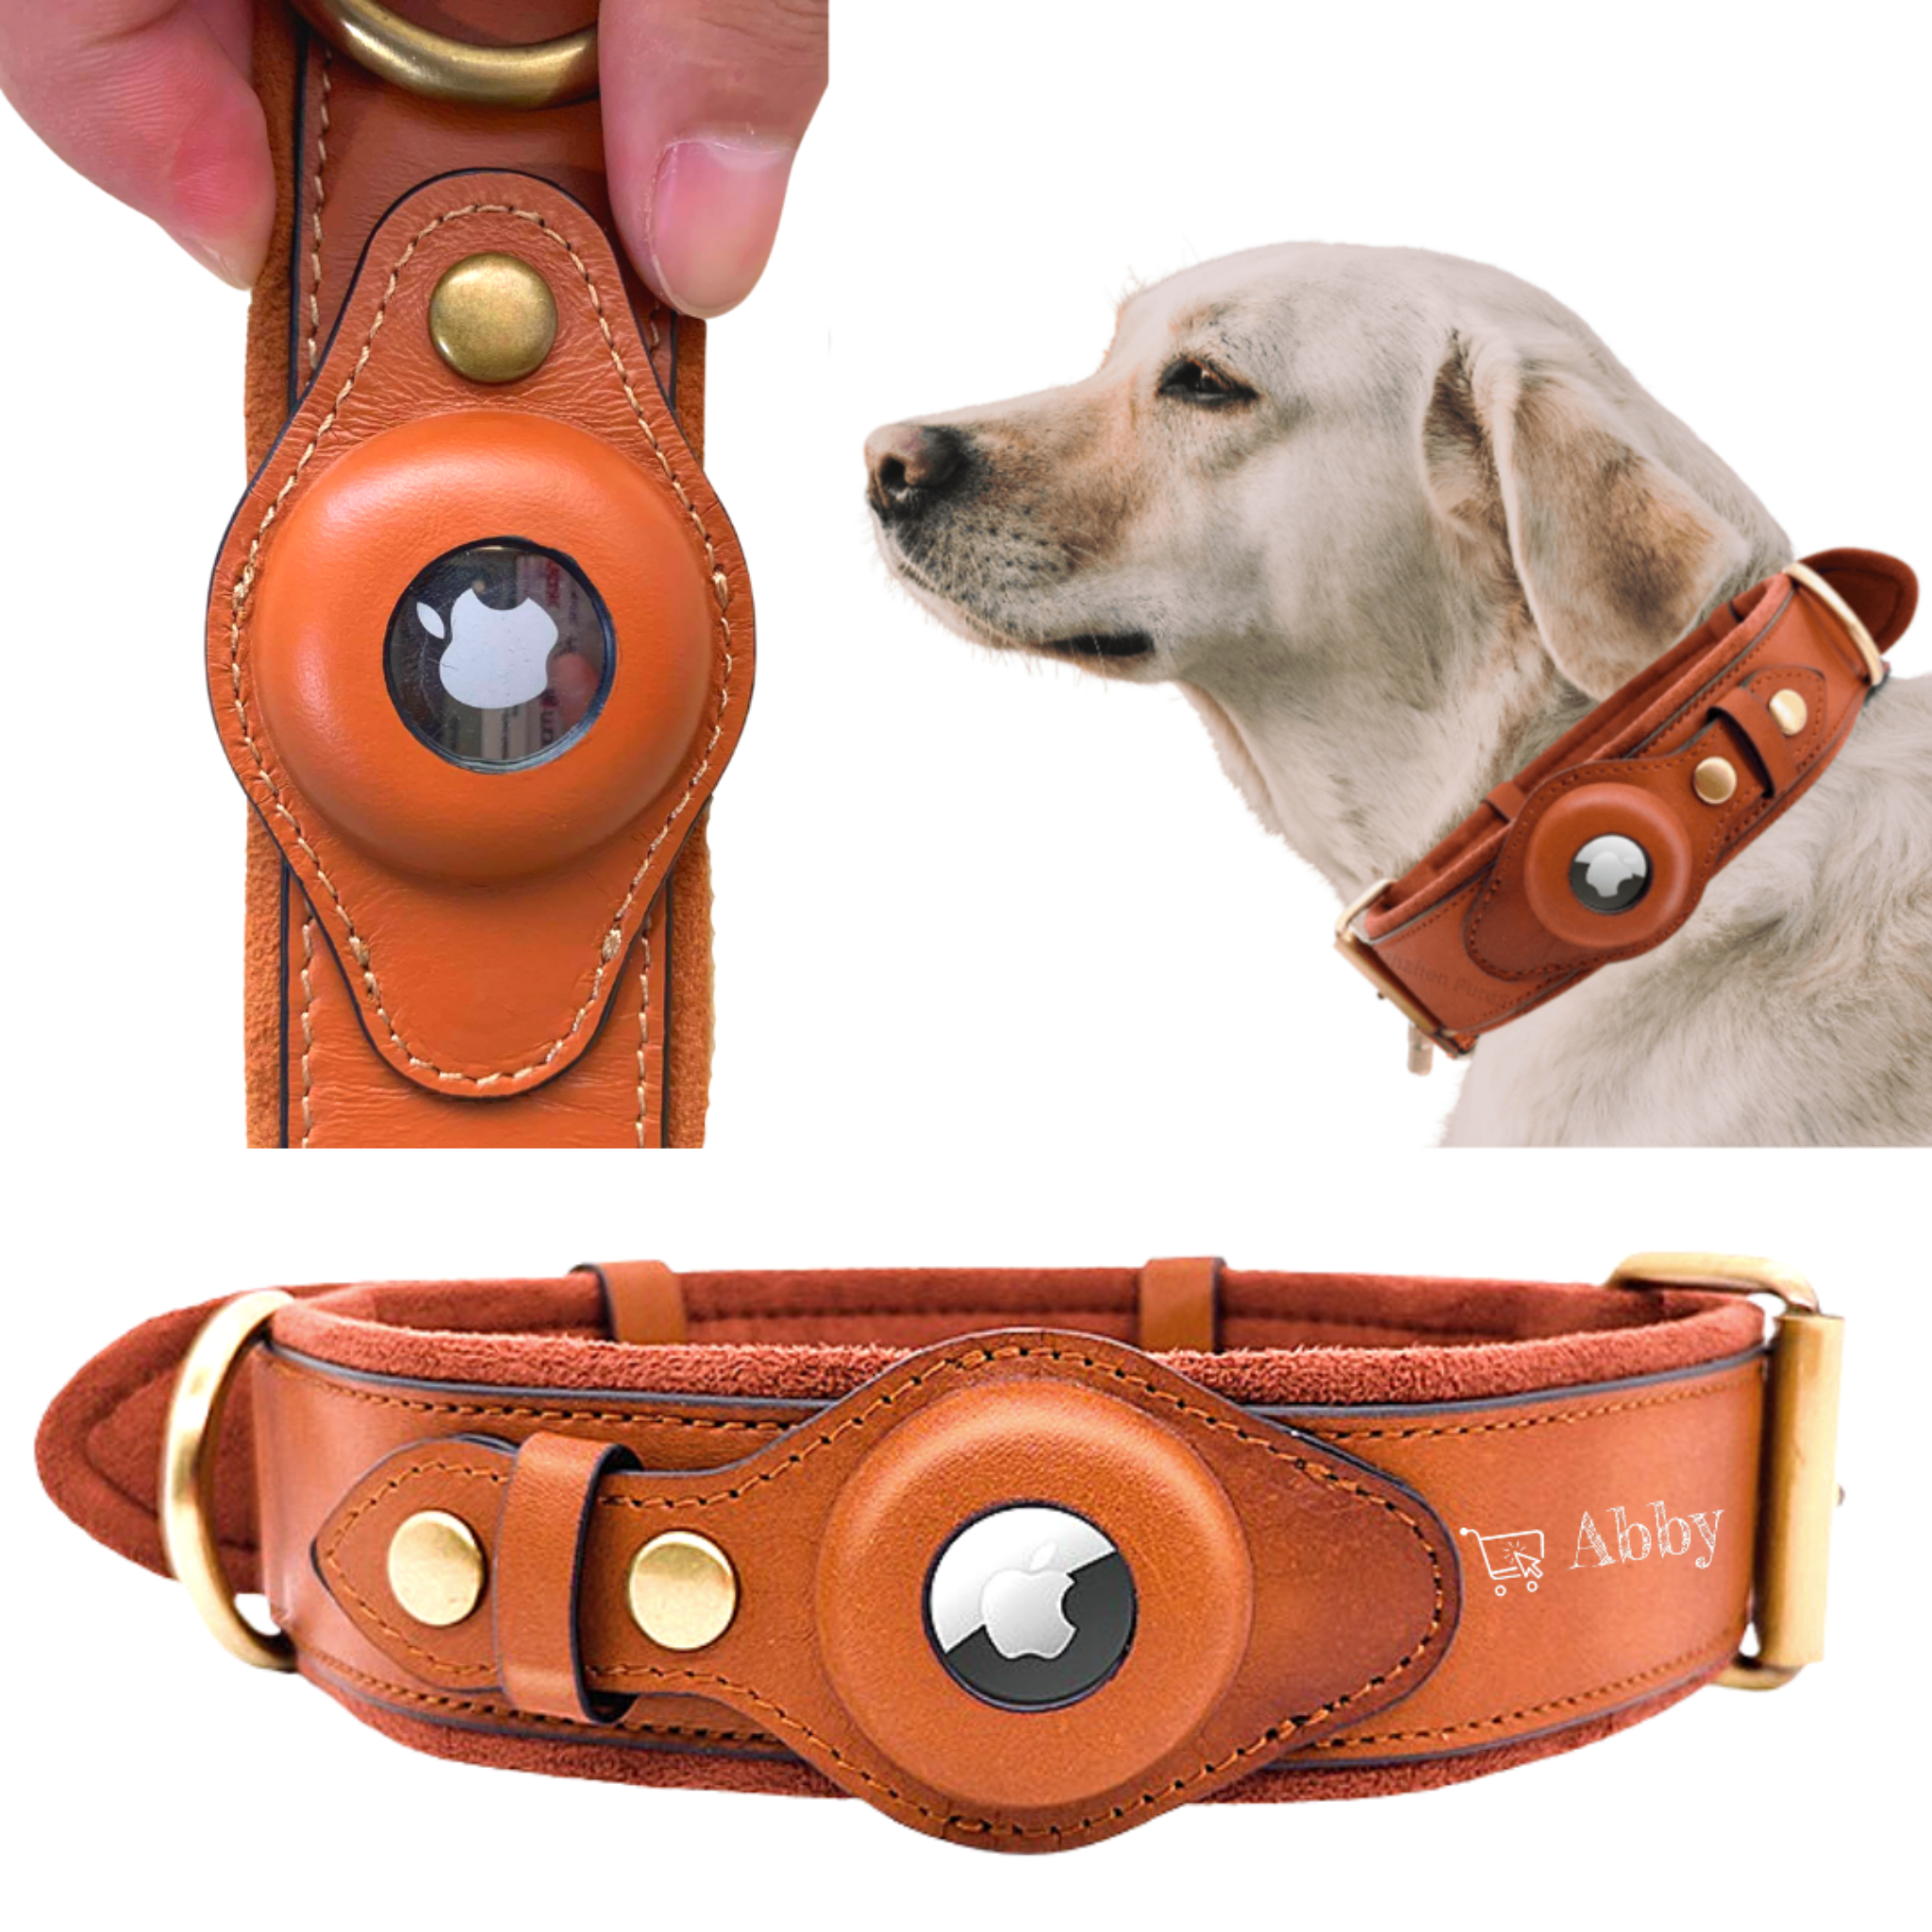 Abby’s Apple AirTag Dog Collar for your Pet, Leather - GPS Tracking - Abbycart